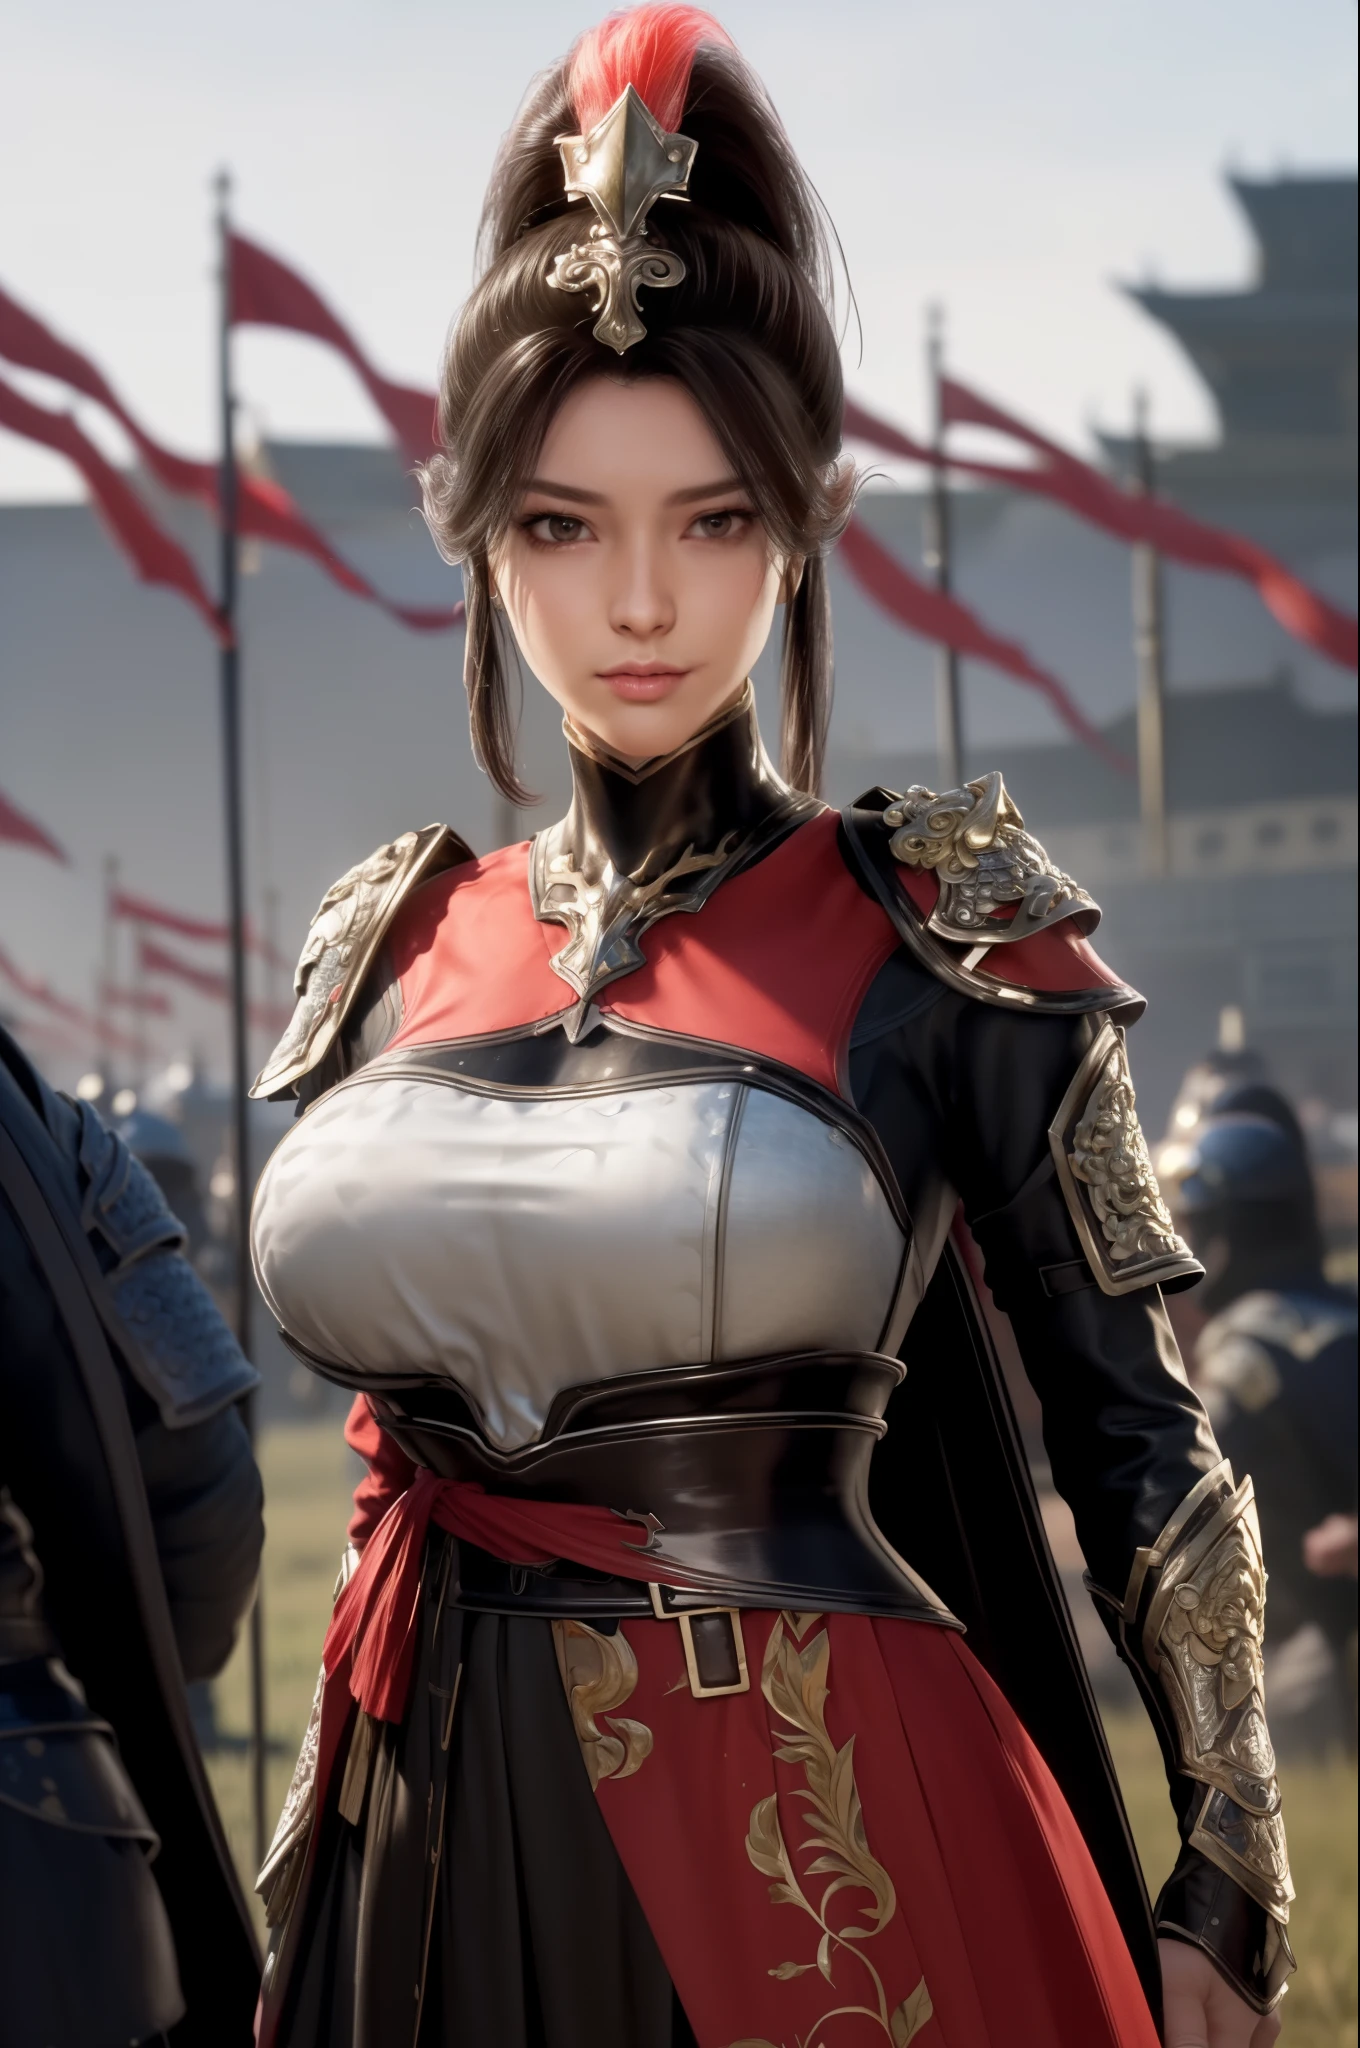 standing in front of a group of people in armor standing in a field with flags in the background,a line of Red flags and a building,
Red outfit,Shoulder_armor,armor,armoRed dress, armoRed boots,Red_cape,High_collar,She has a helmet on her head,
Keep_arms,spear,actual, tHighHighs,,
Bangs,Black_hair,Brown_Eye,long_hair,turtleneck sweater,
1 girl, 20 years,adult,beautiful Finger,beautiful long legs,beautiful body,beautiful Nose,beautiful character design, perfect Eye, perfect Face,
looking at the audience, 
NSFW,official art,Extremely detailed CG unified 8k wallpaper, perfect lighting,rich and colorful, bright_front_Face_light,
(masterpiece:1.0),(the best_quality:1.0), ultra High res,4k,Super detailed,
photography, 8k, high dynamic range, Highres, Ridiculous:1.2, Kodak Portrait 400, film grain, blurred background, Bokeh:1.2, lens flare, (Energetic_color:1.2)
(beautiful,big deal_breast:1.4), (beautiful_Face:1.5),(narrow_waist),